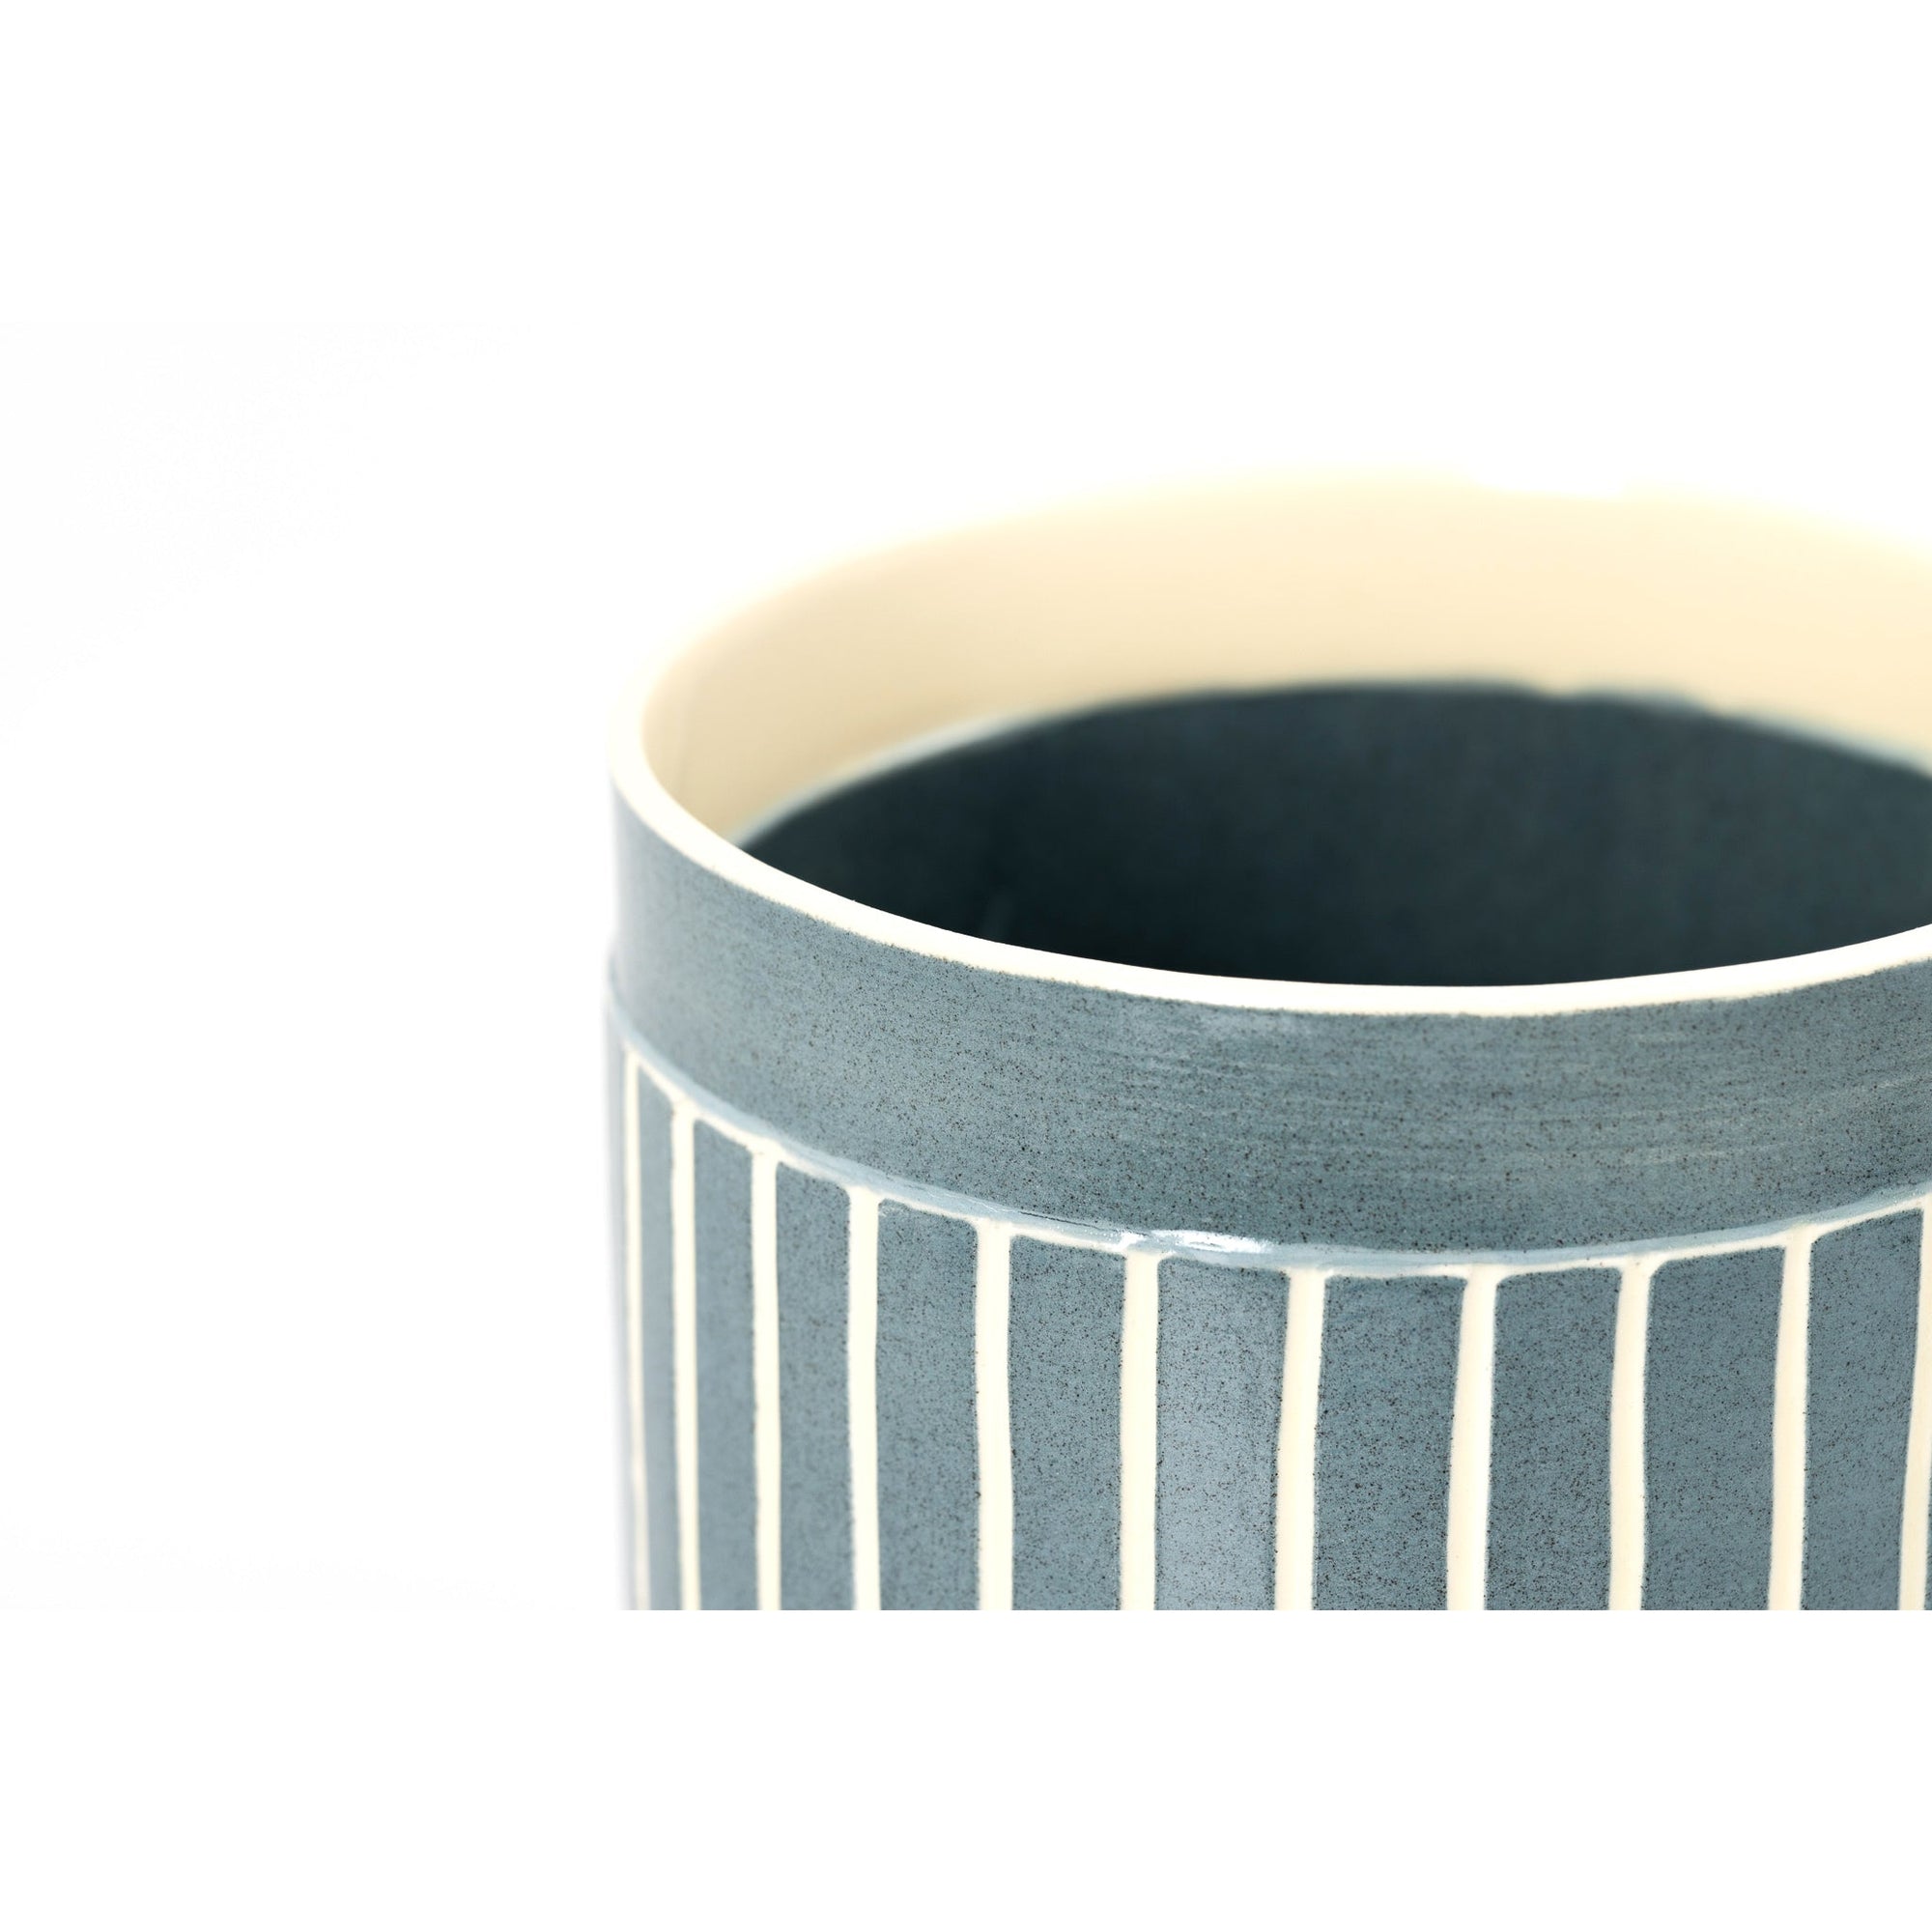 MR15 Mid Round Vessel, handbuilt ceramic created by Emily-Kriste Wilcox, available from Padstow Gallery, Cornwall